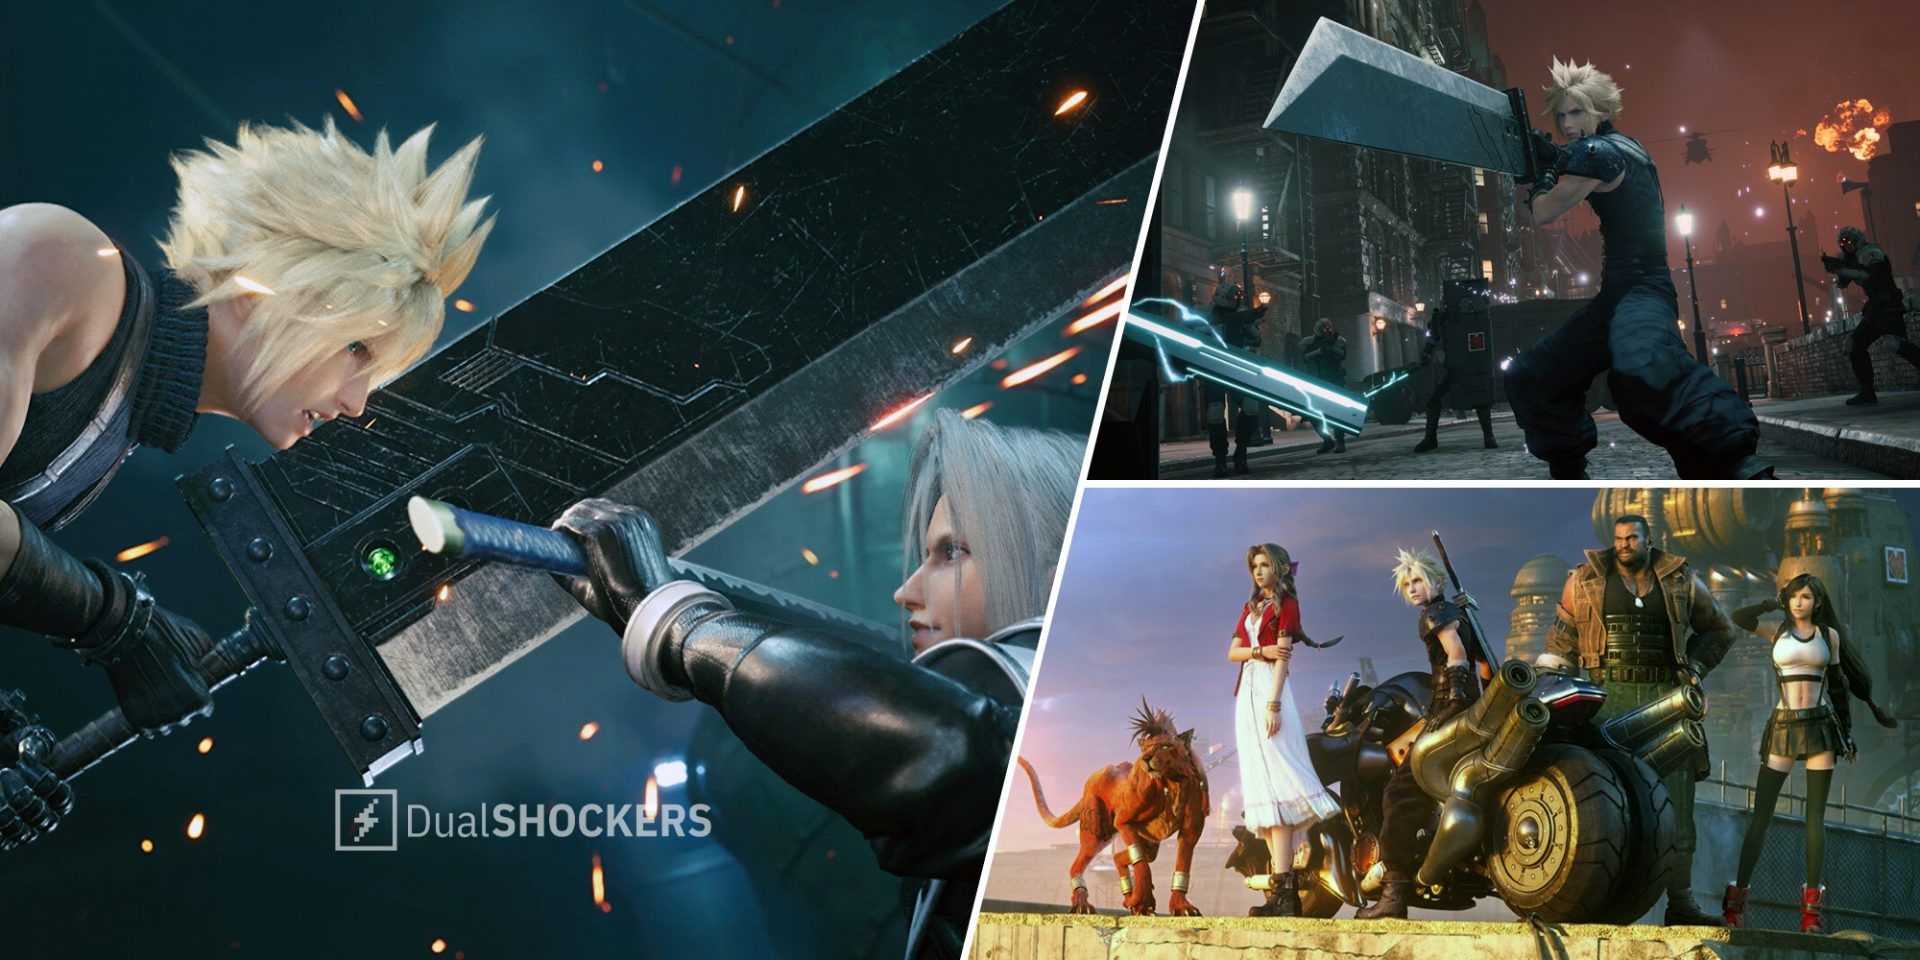 Final Fantasy 7 Cloud Strife and Sephiroth on left, Cloud Strife on top right, characters on bottom right